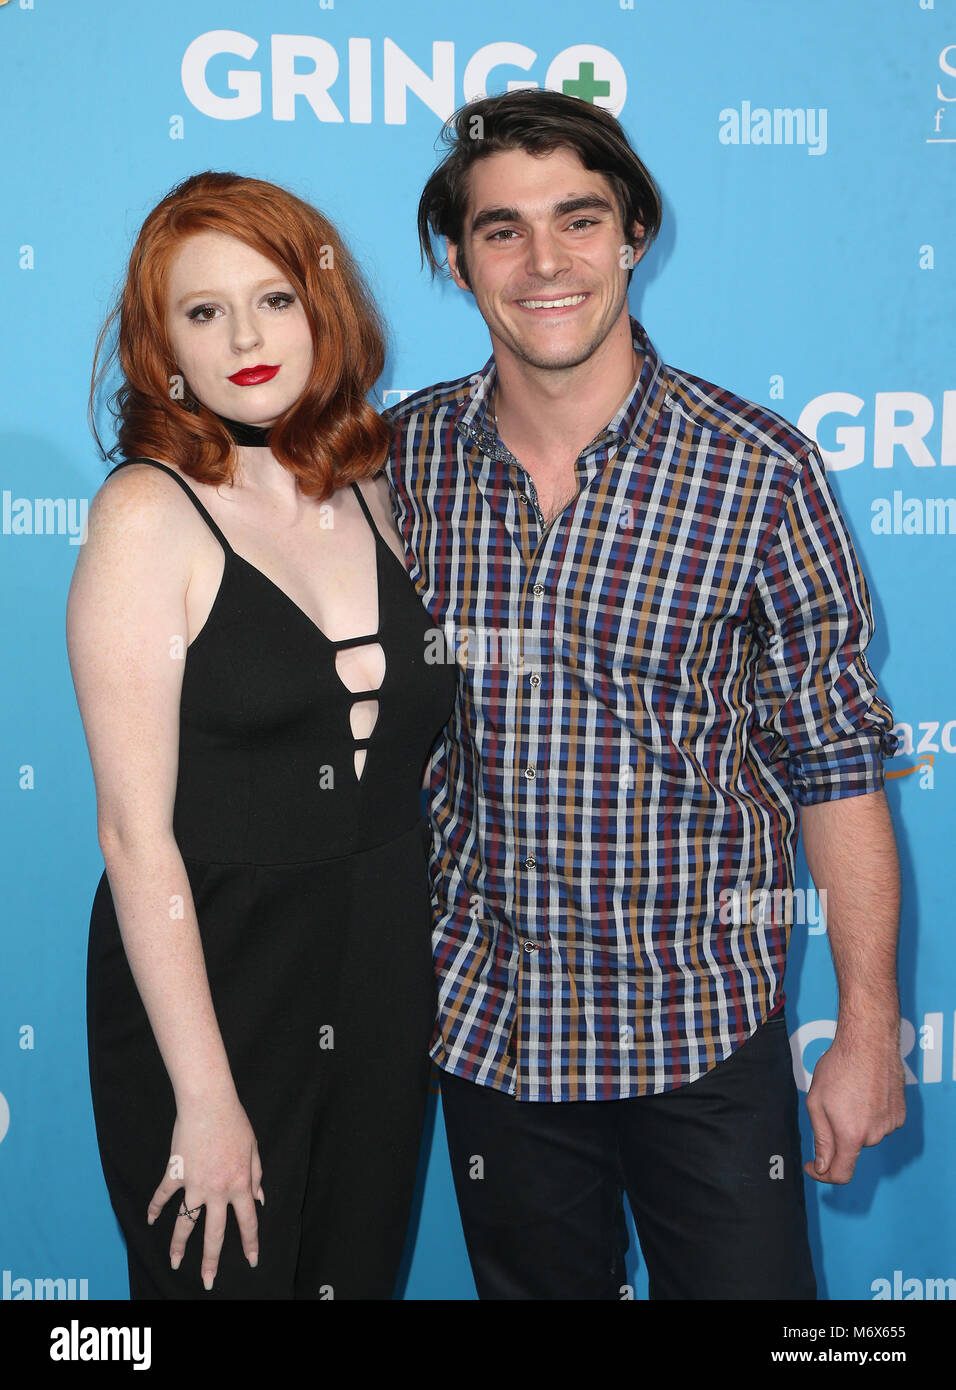 Los Angeles, Ca, USA. 6th Mar, 2018. Lacianne Carriere, RJ Mitte, at the  Woled Premiere of Gringo at L.A. Live Regal Cinemas in Los Angeles,  California on March 6, 2018. Credit: Faye